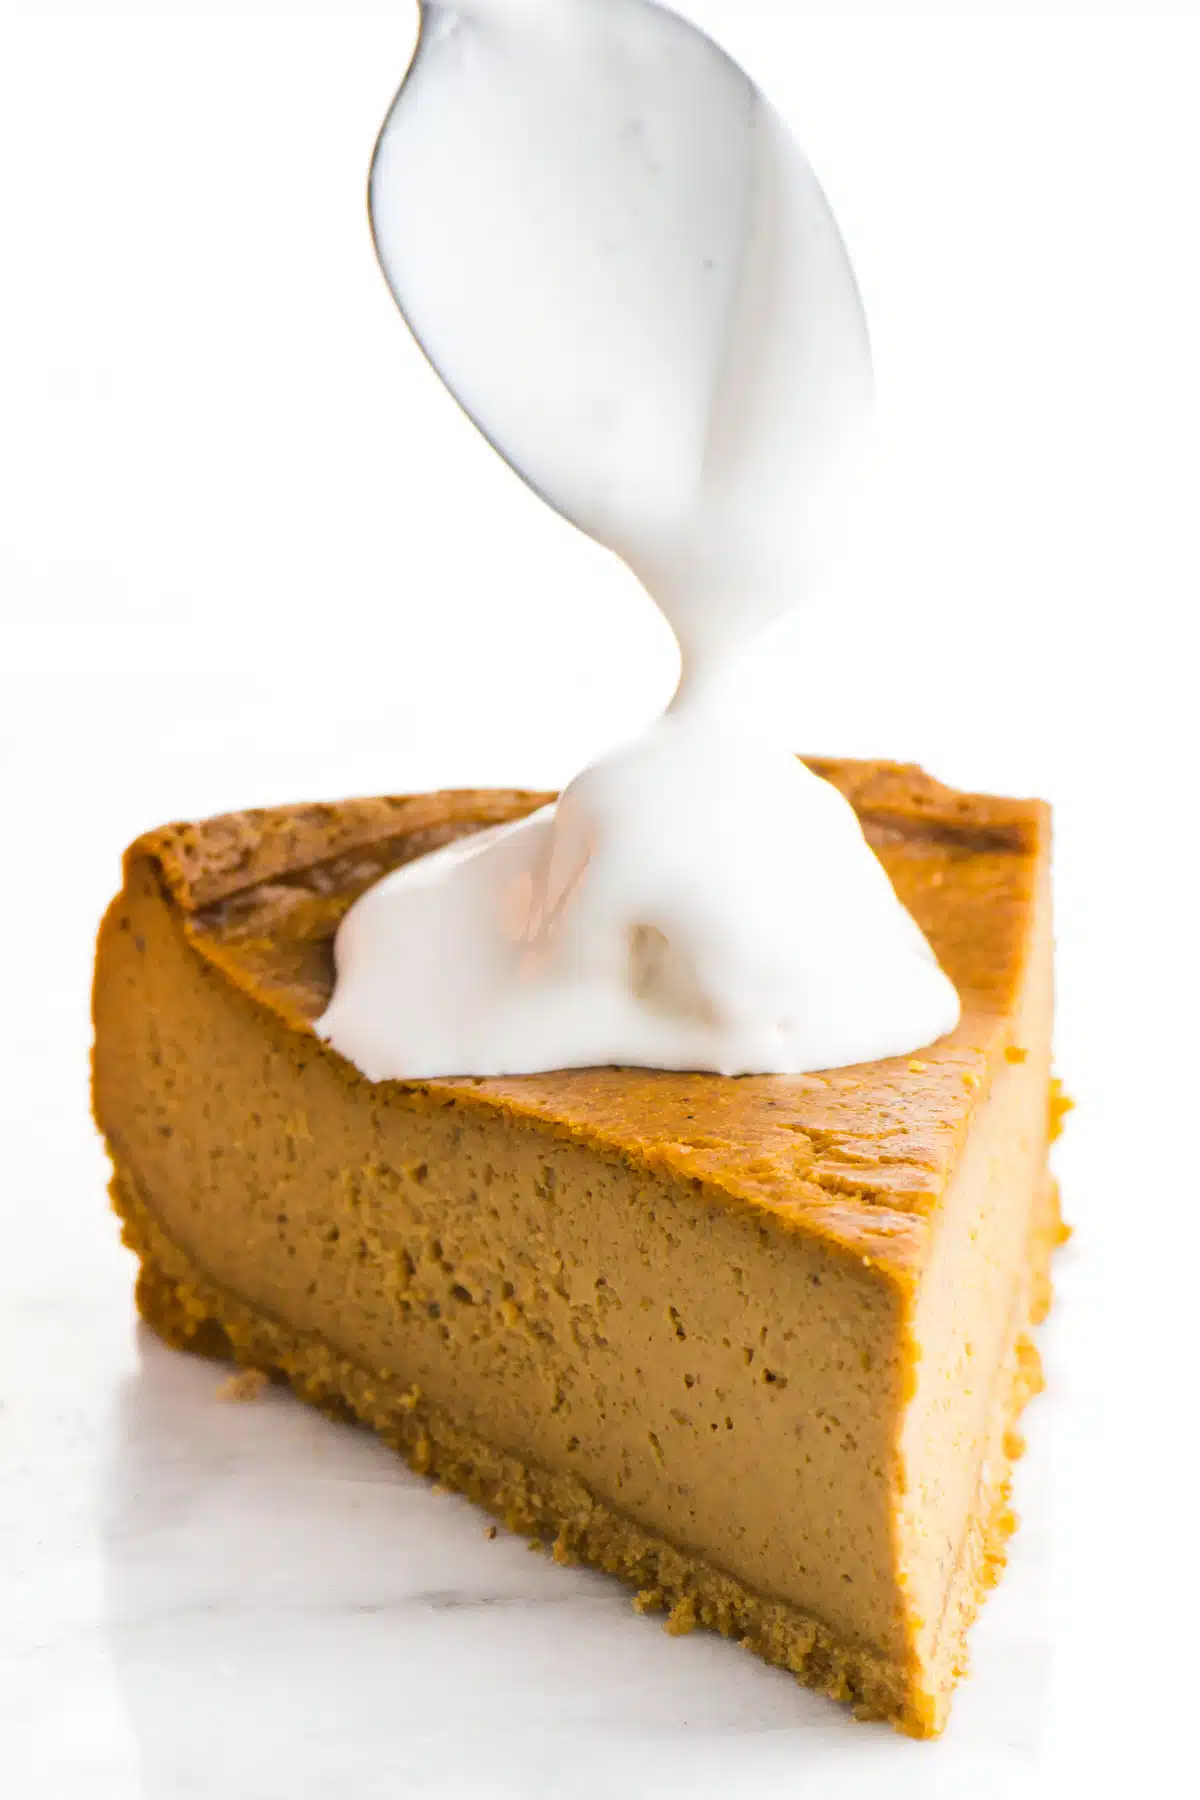 A spoon hovers over a slice of cheesecake, drizzling whipped cream over the top.